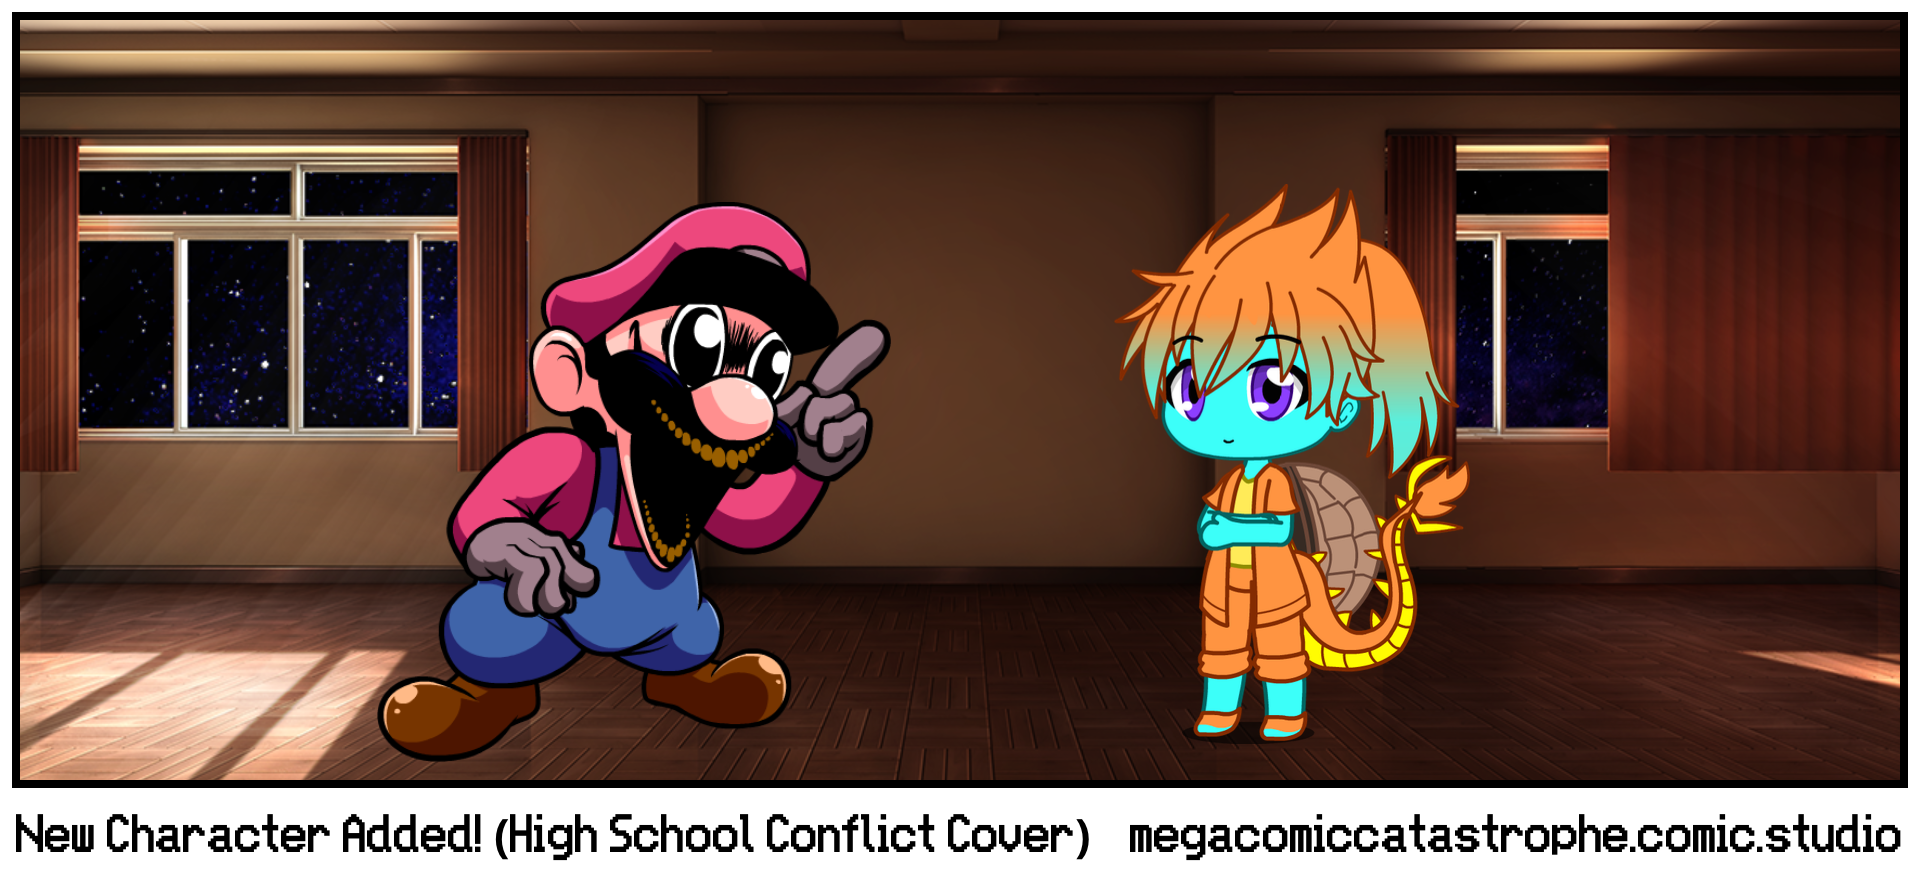 New Character Added! (High School Conflict Cover)